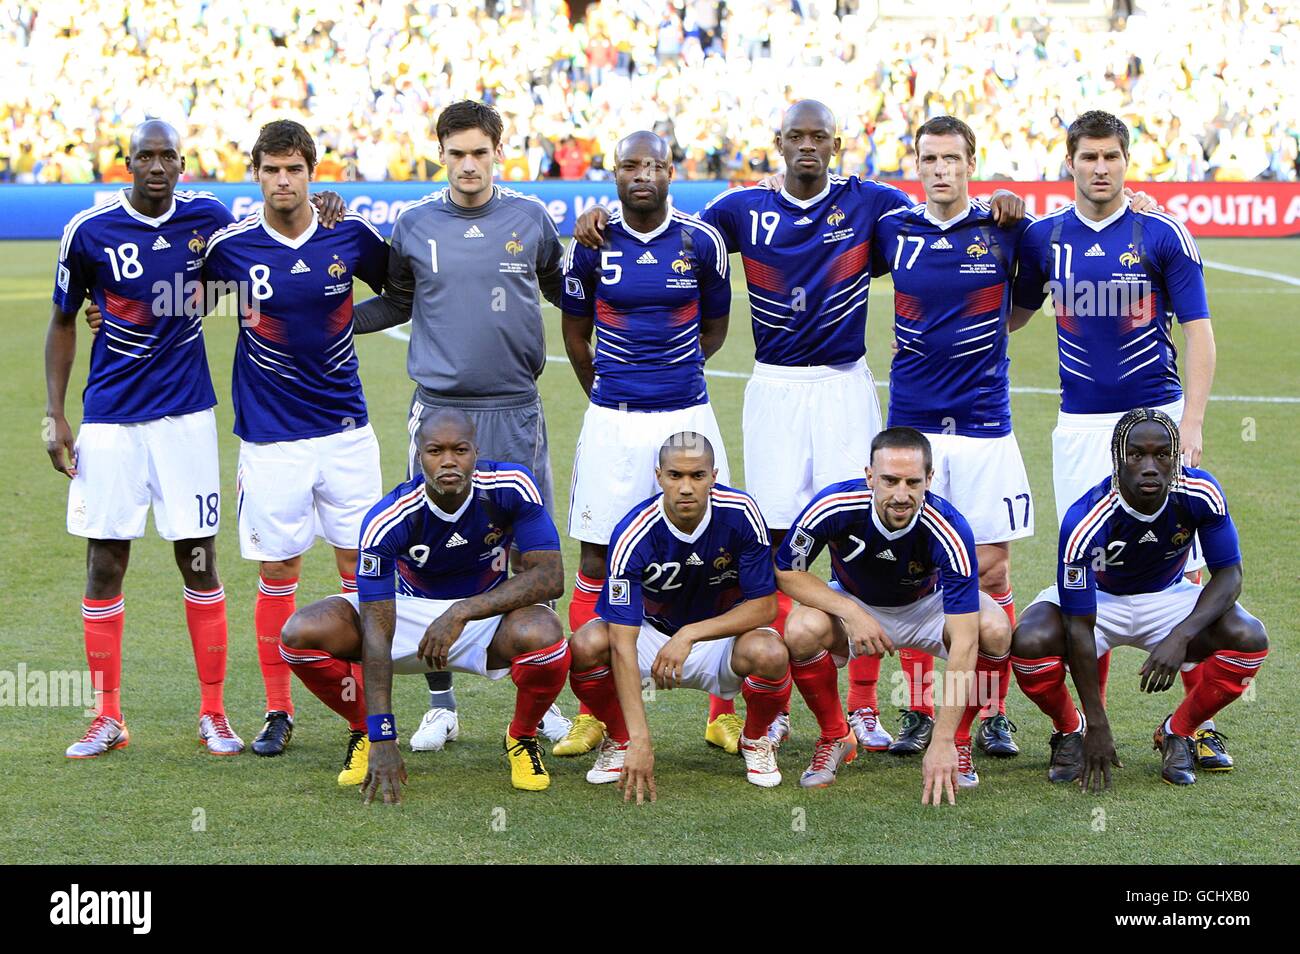 Soccer - 2010 FIFA World Cup South Africa - Group A - France v South Africa  - Free State Stadium. France team line up Stock Photo - Alamy